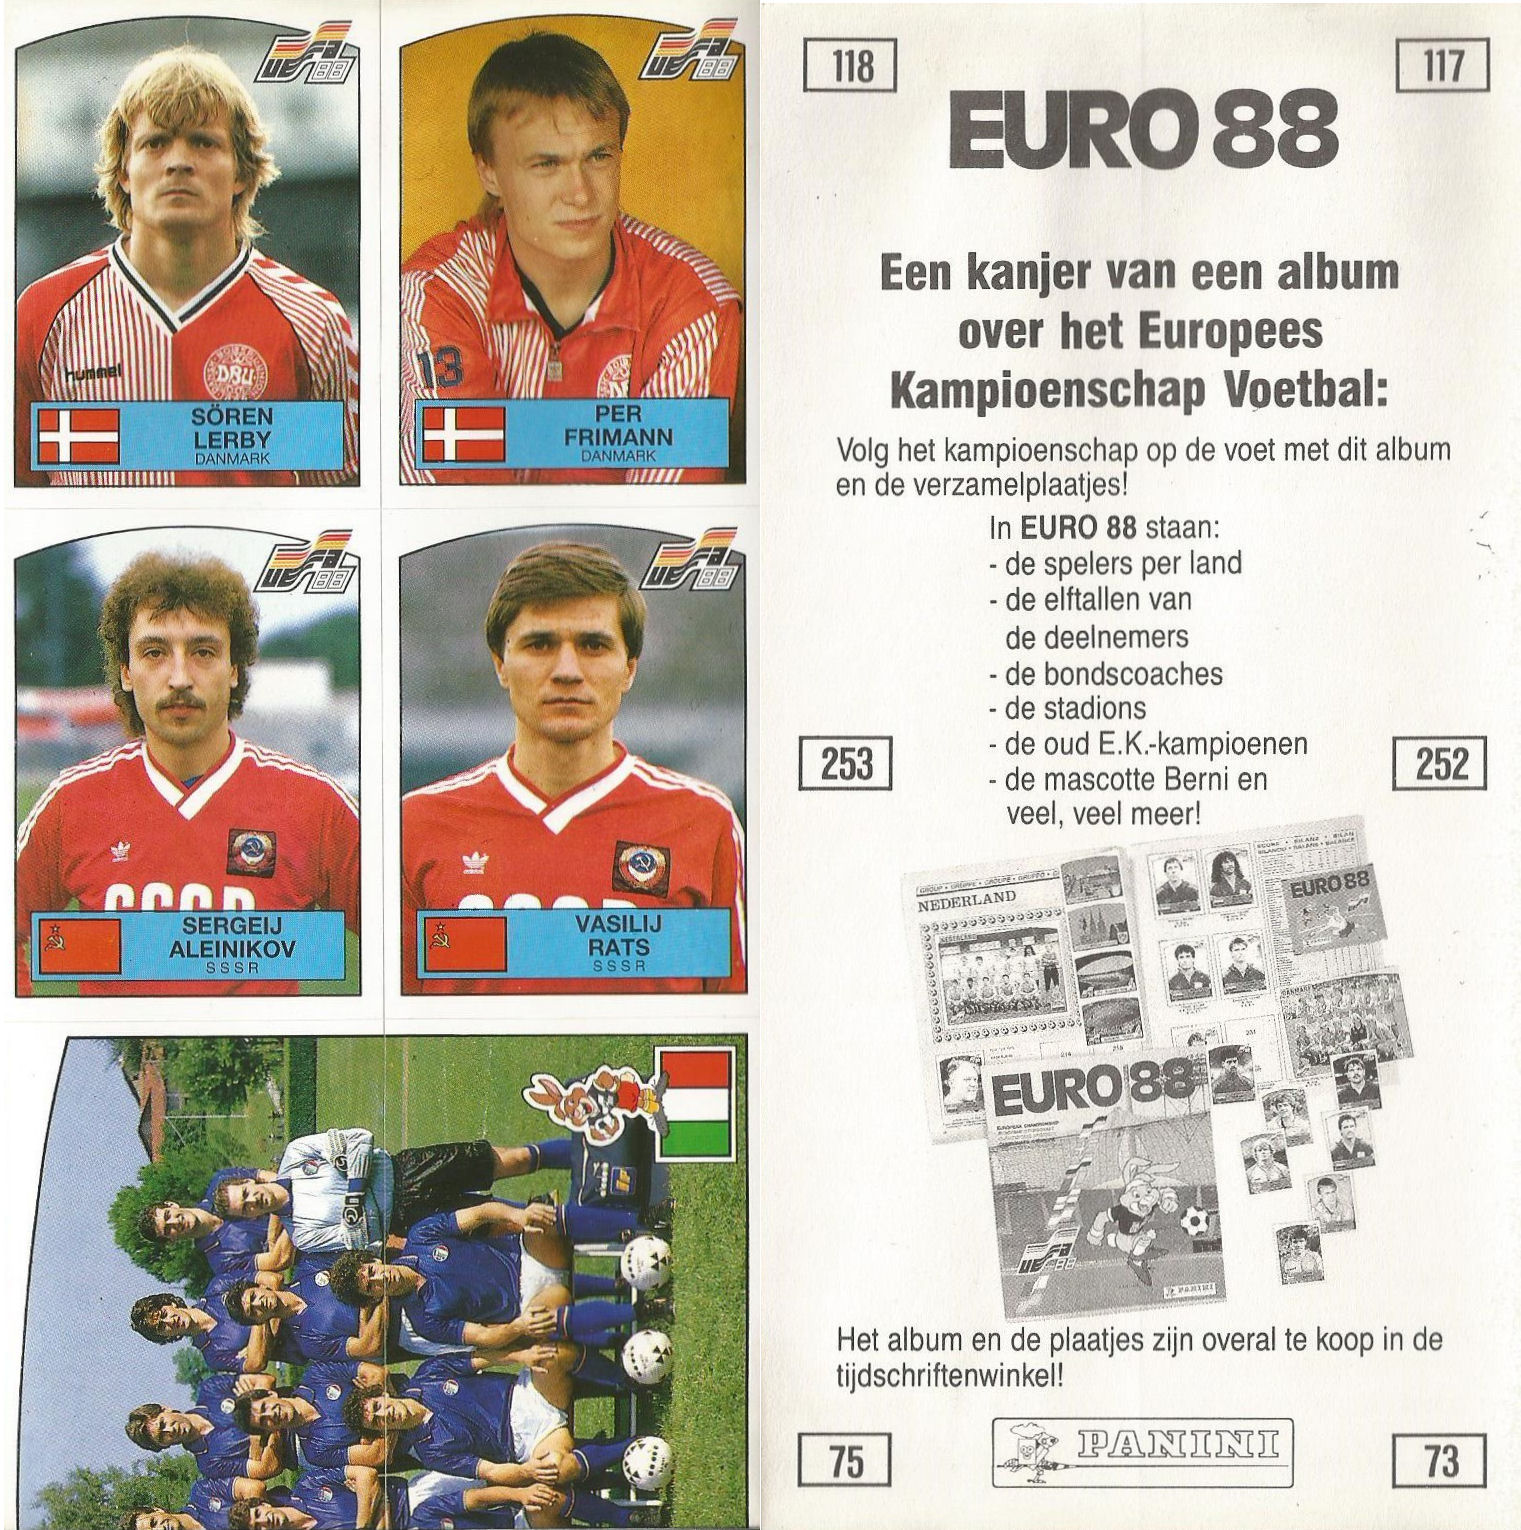 FKS SOCCER STARS 1974/75 individual stickers lots available....2 for £1 